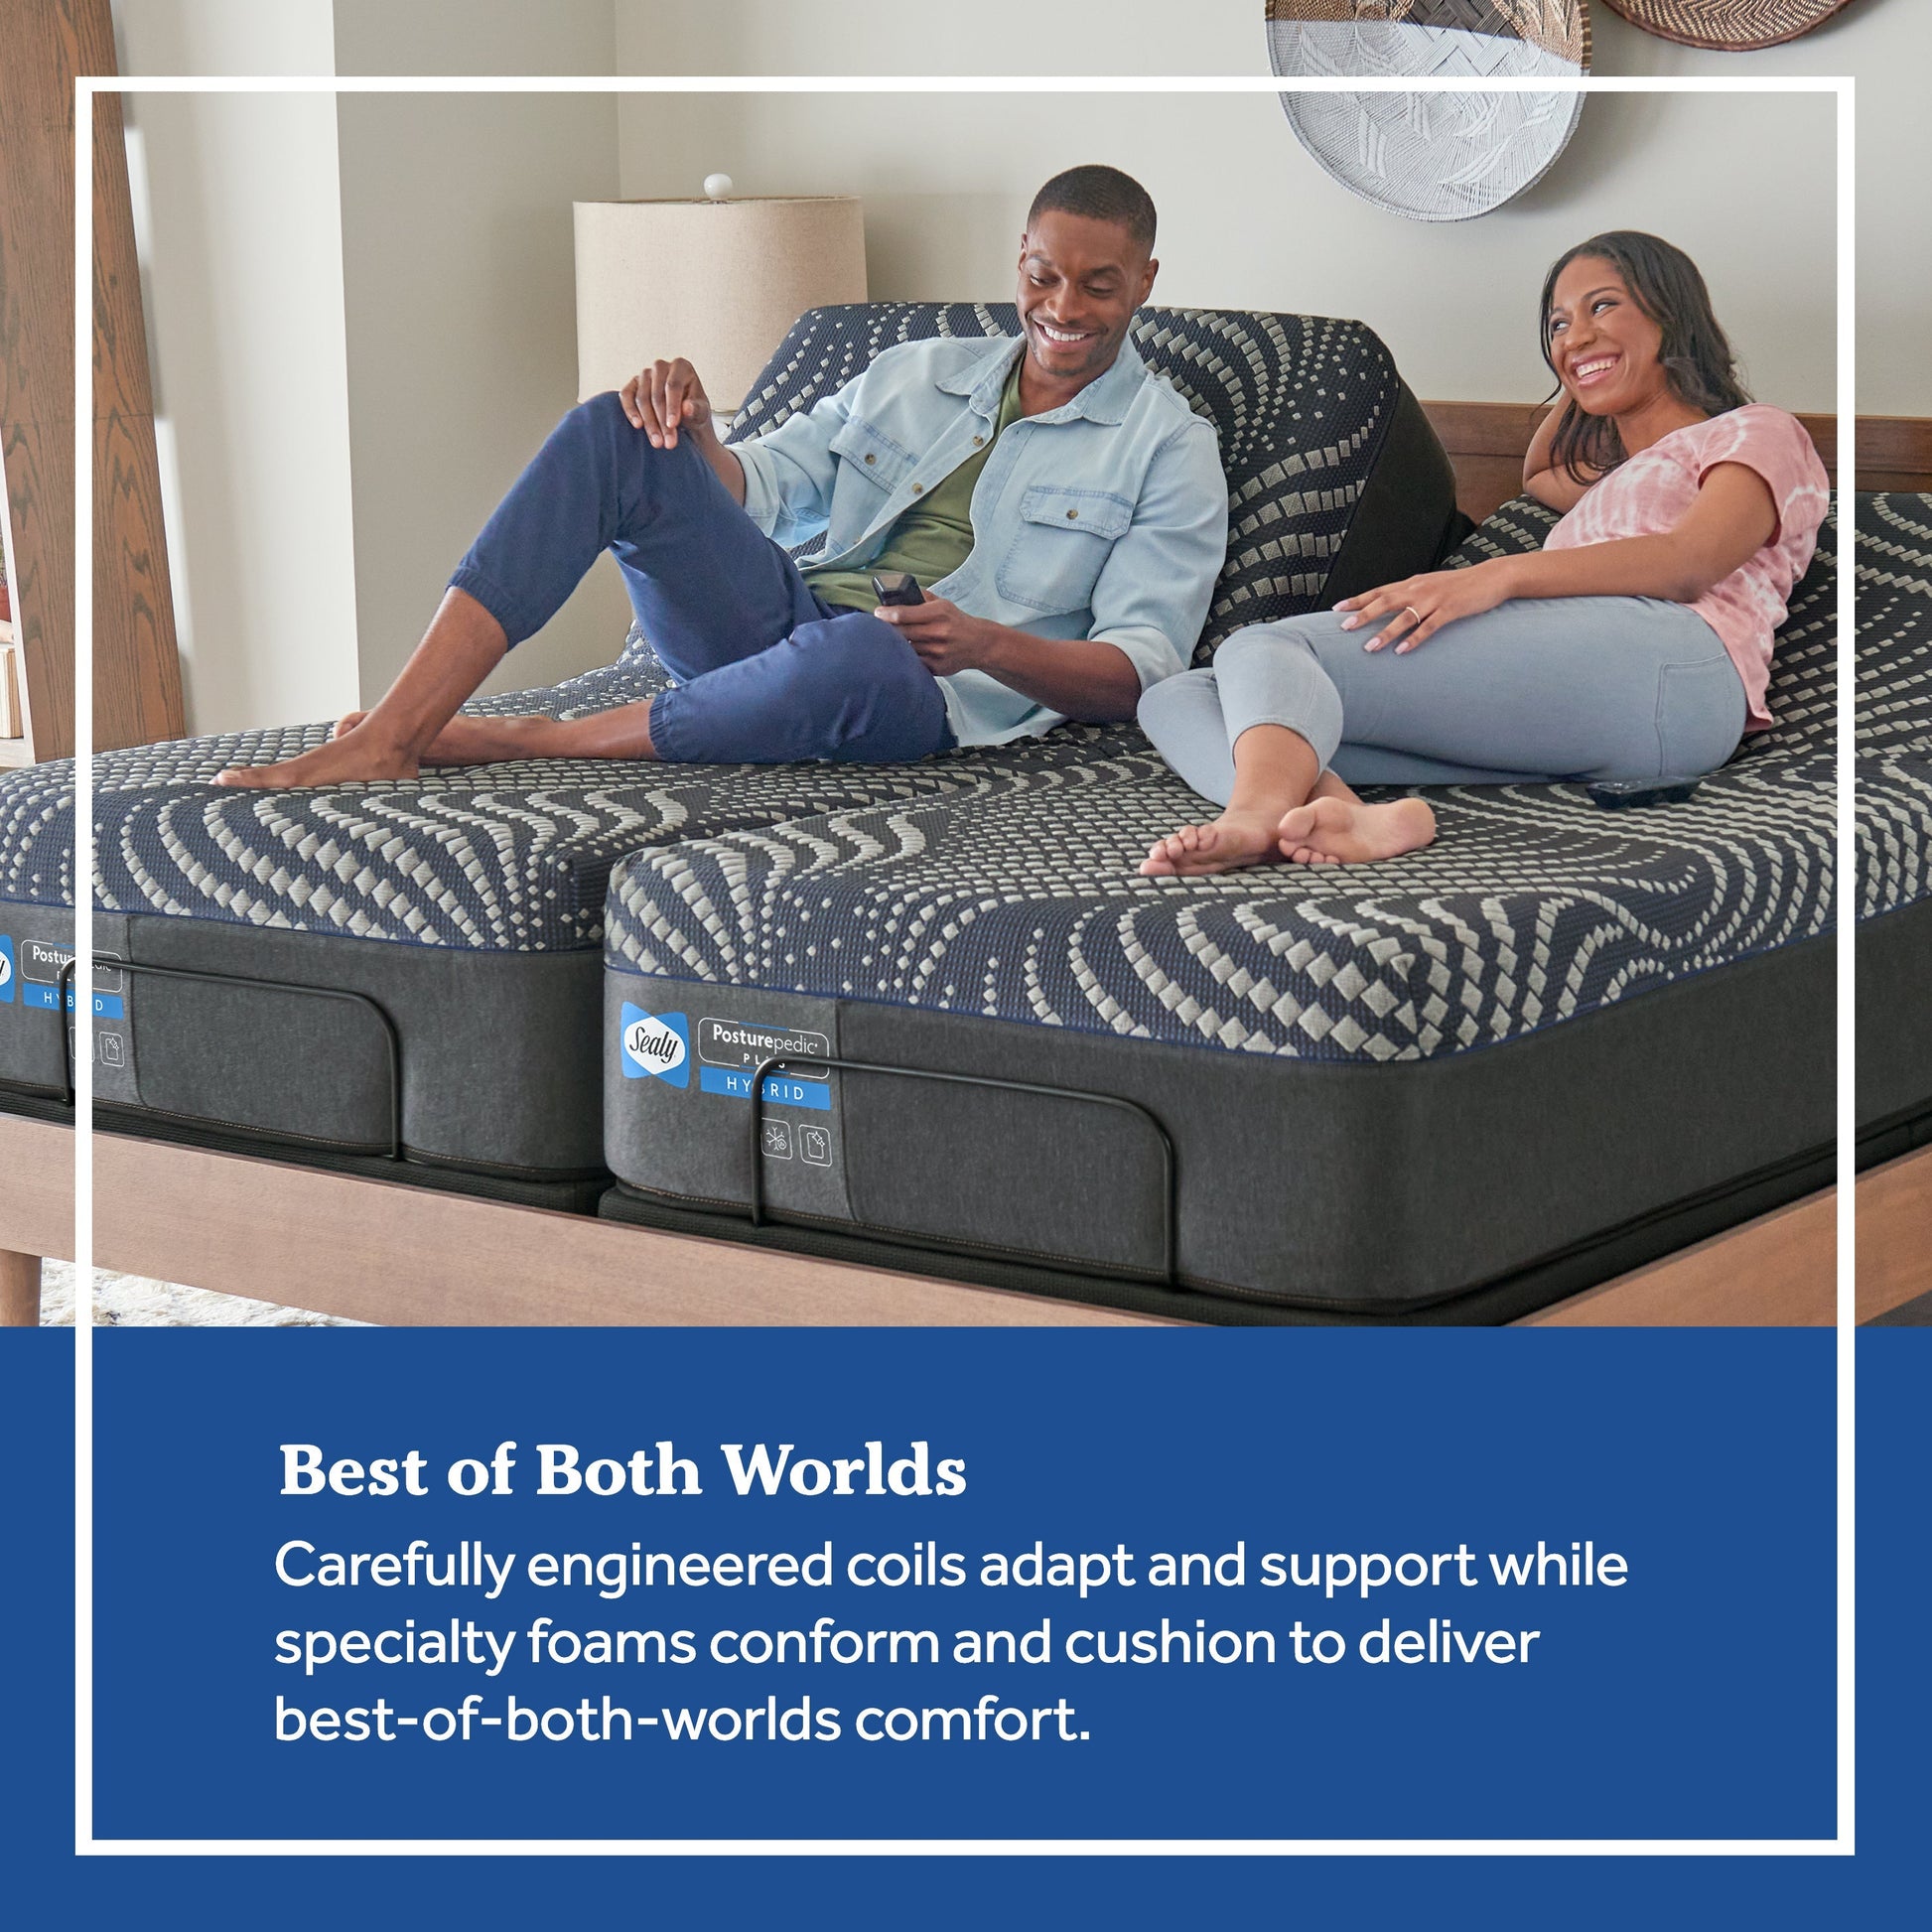 Sealy Albany Medium Hybrid Mattress Best of both worlds; carefully engineered coils adapt and support while specialty foams conform and cushion to deliver best-of-both-worlds comfort